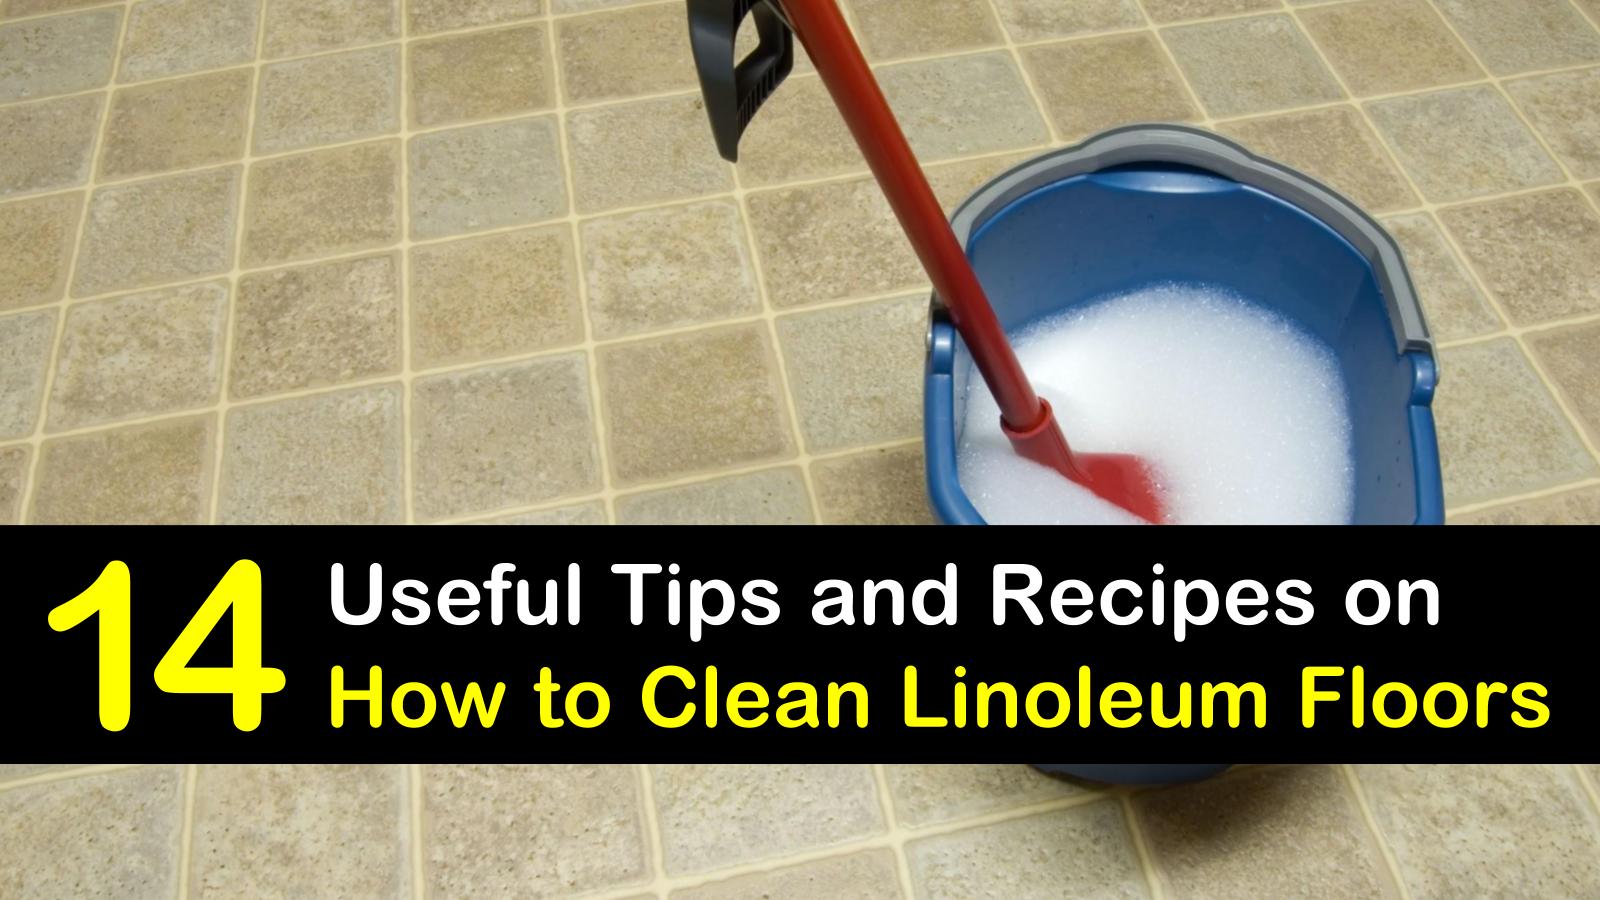 14 Creative Ways To Clean Linoleum Floors, How Do You Remove Discoloration From Vinyl Flooring